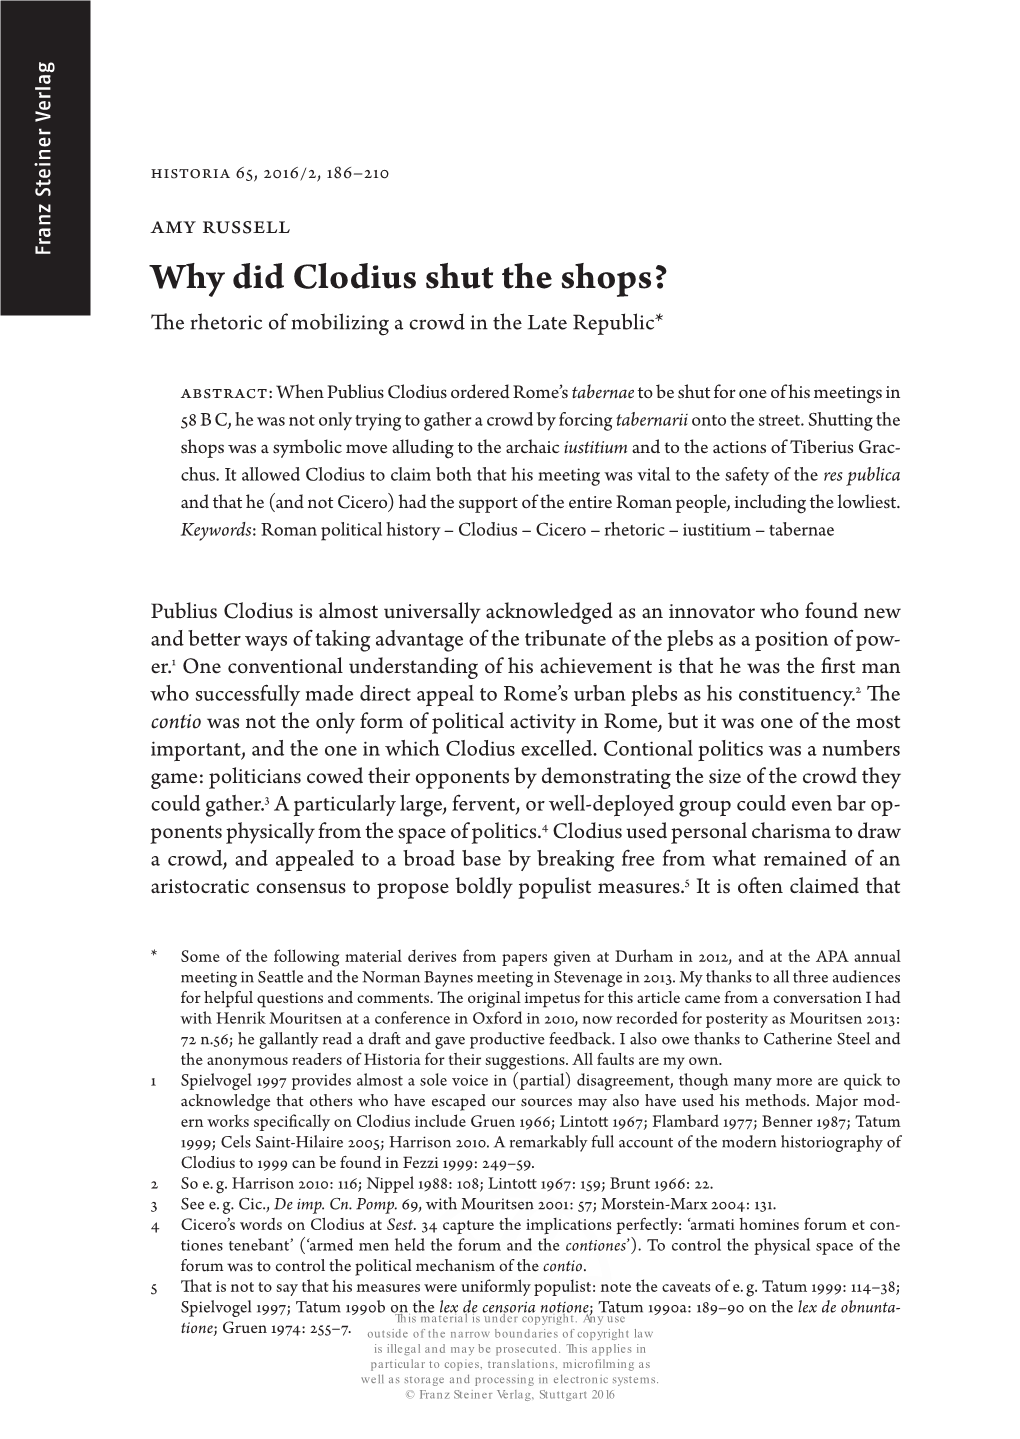 Why Did Clodius Shut the Shops? the Rhetoric of Mobilizing a Crowd in the Late Republic*